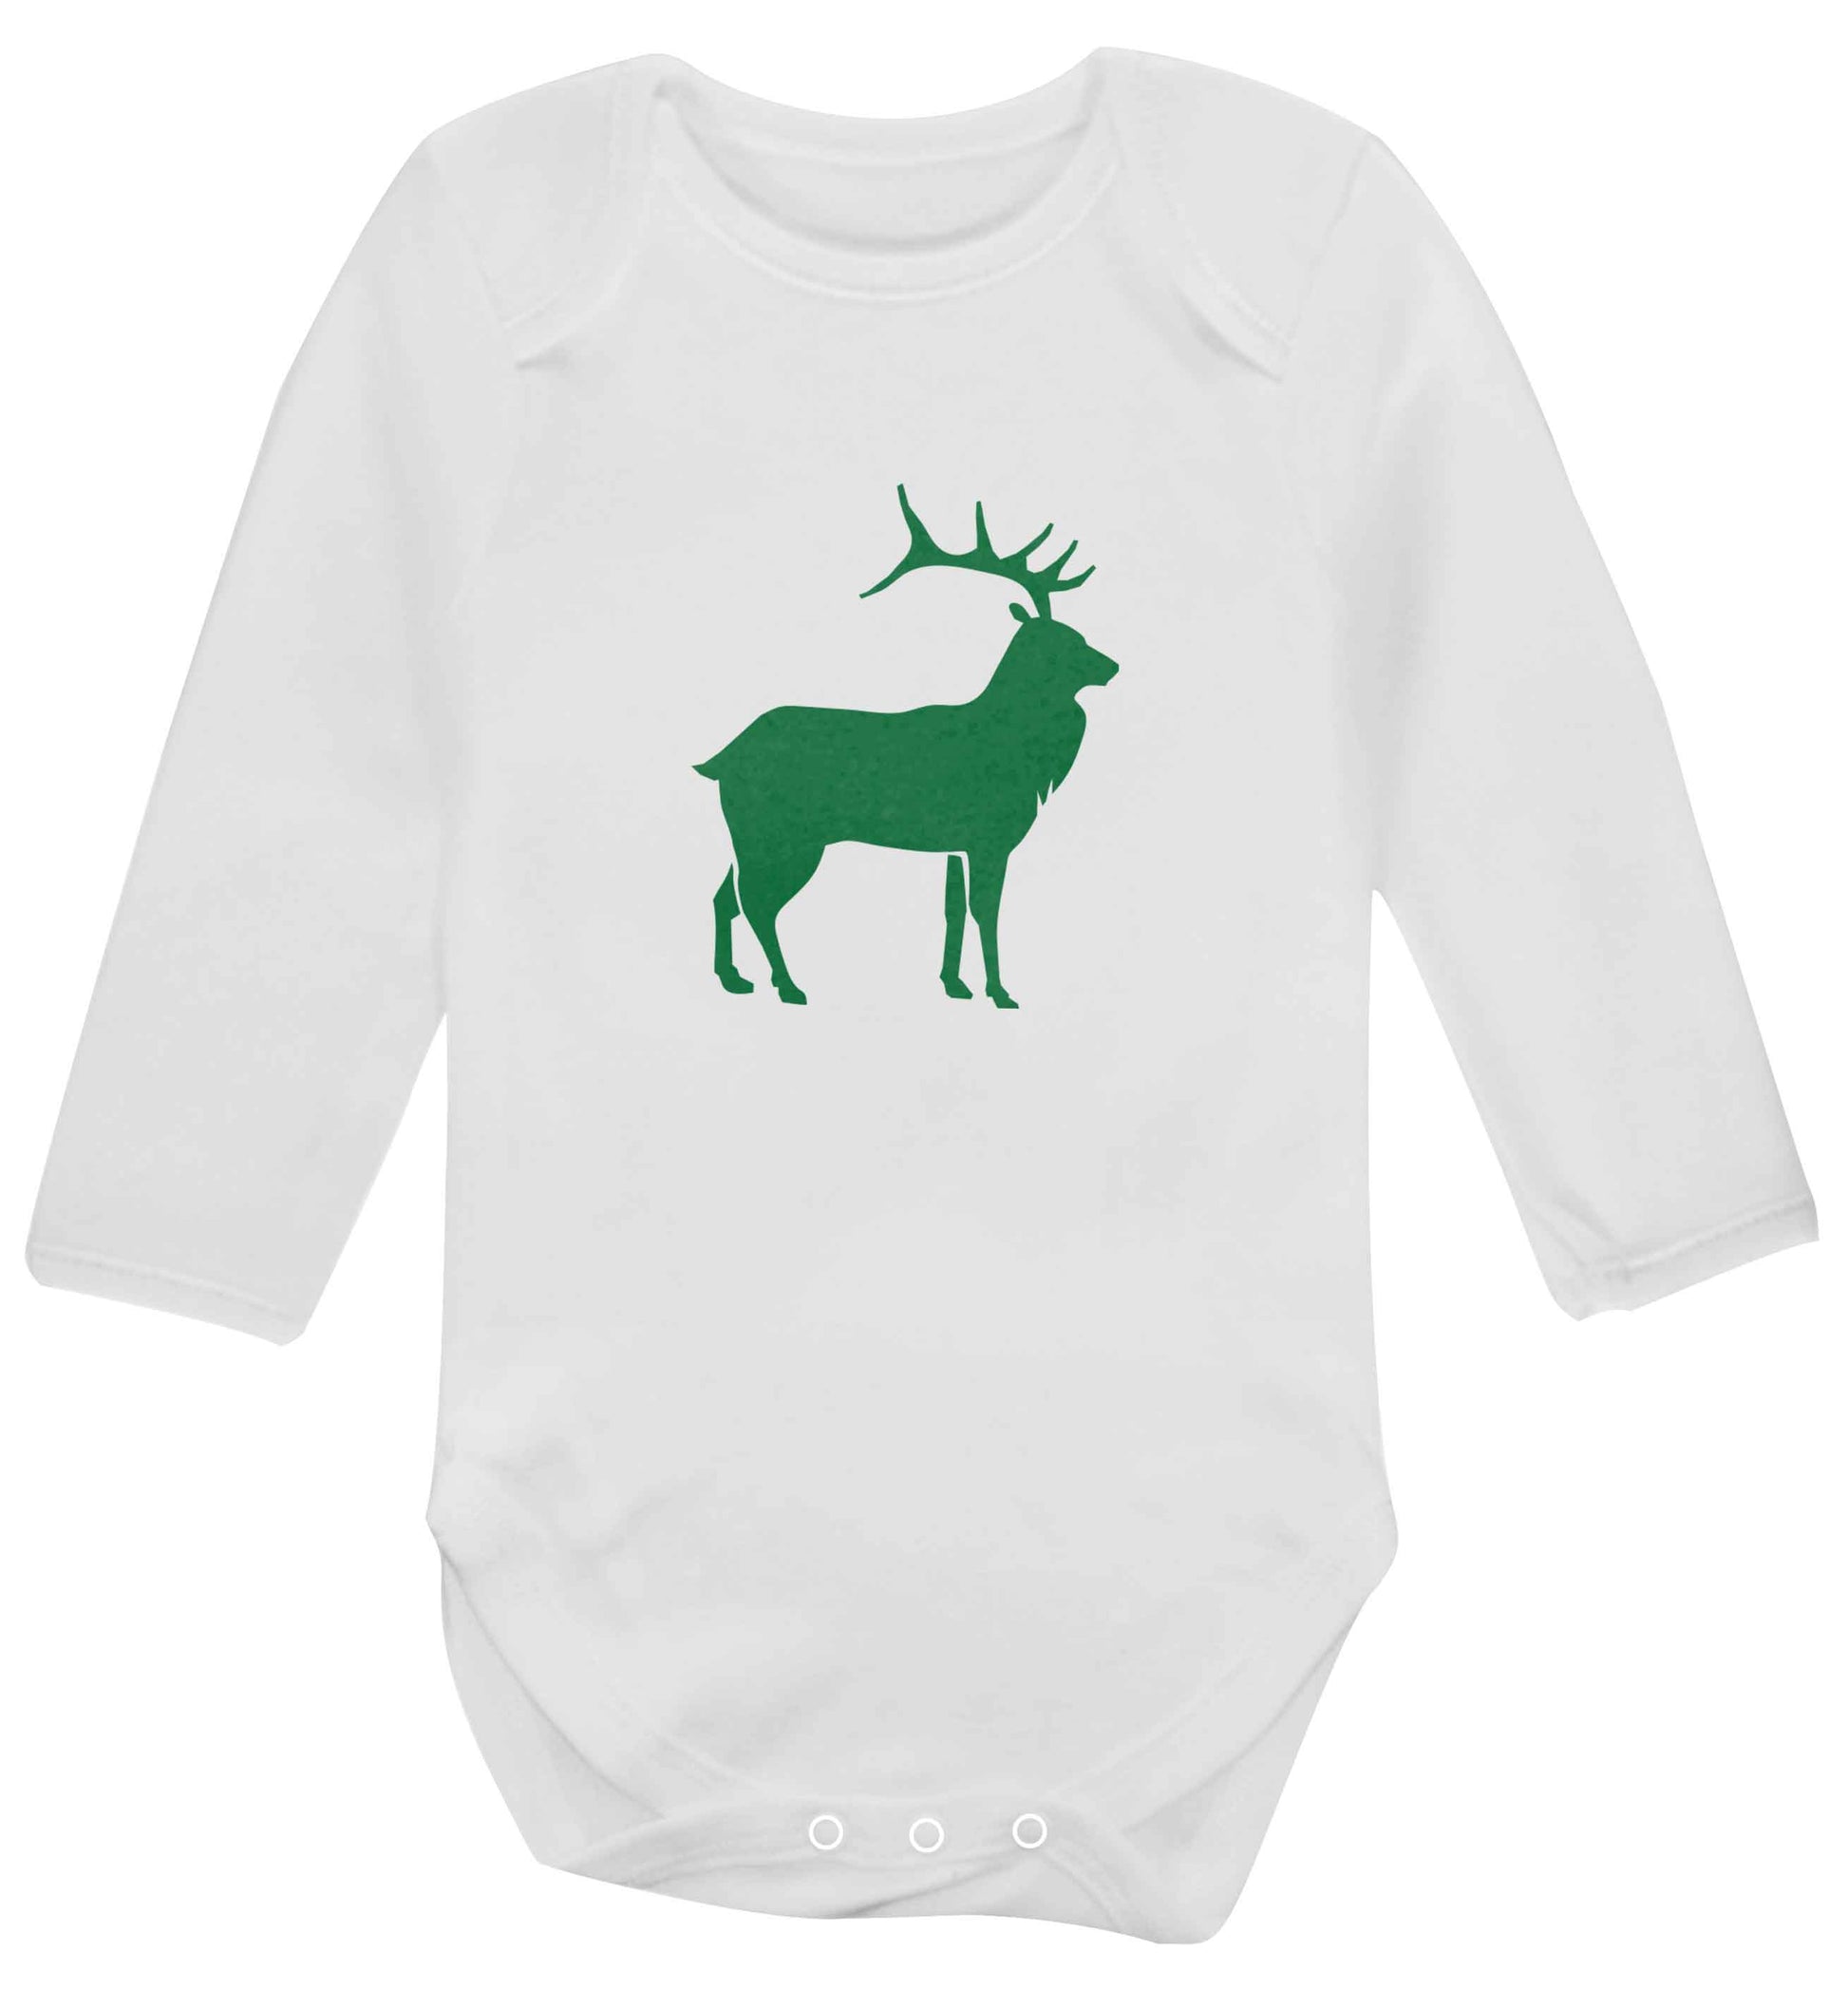 Green stag baby vest long sleeved white 6-12 months